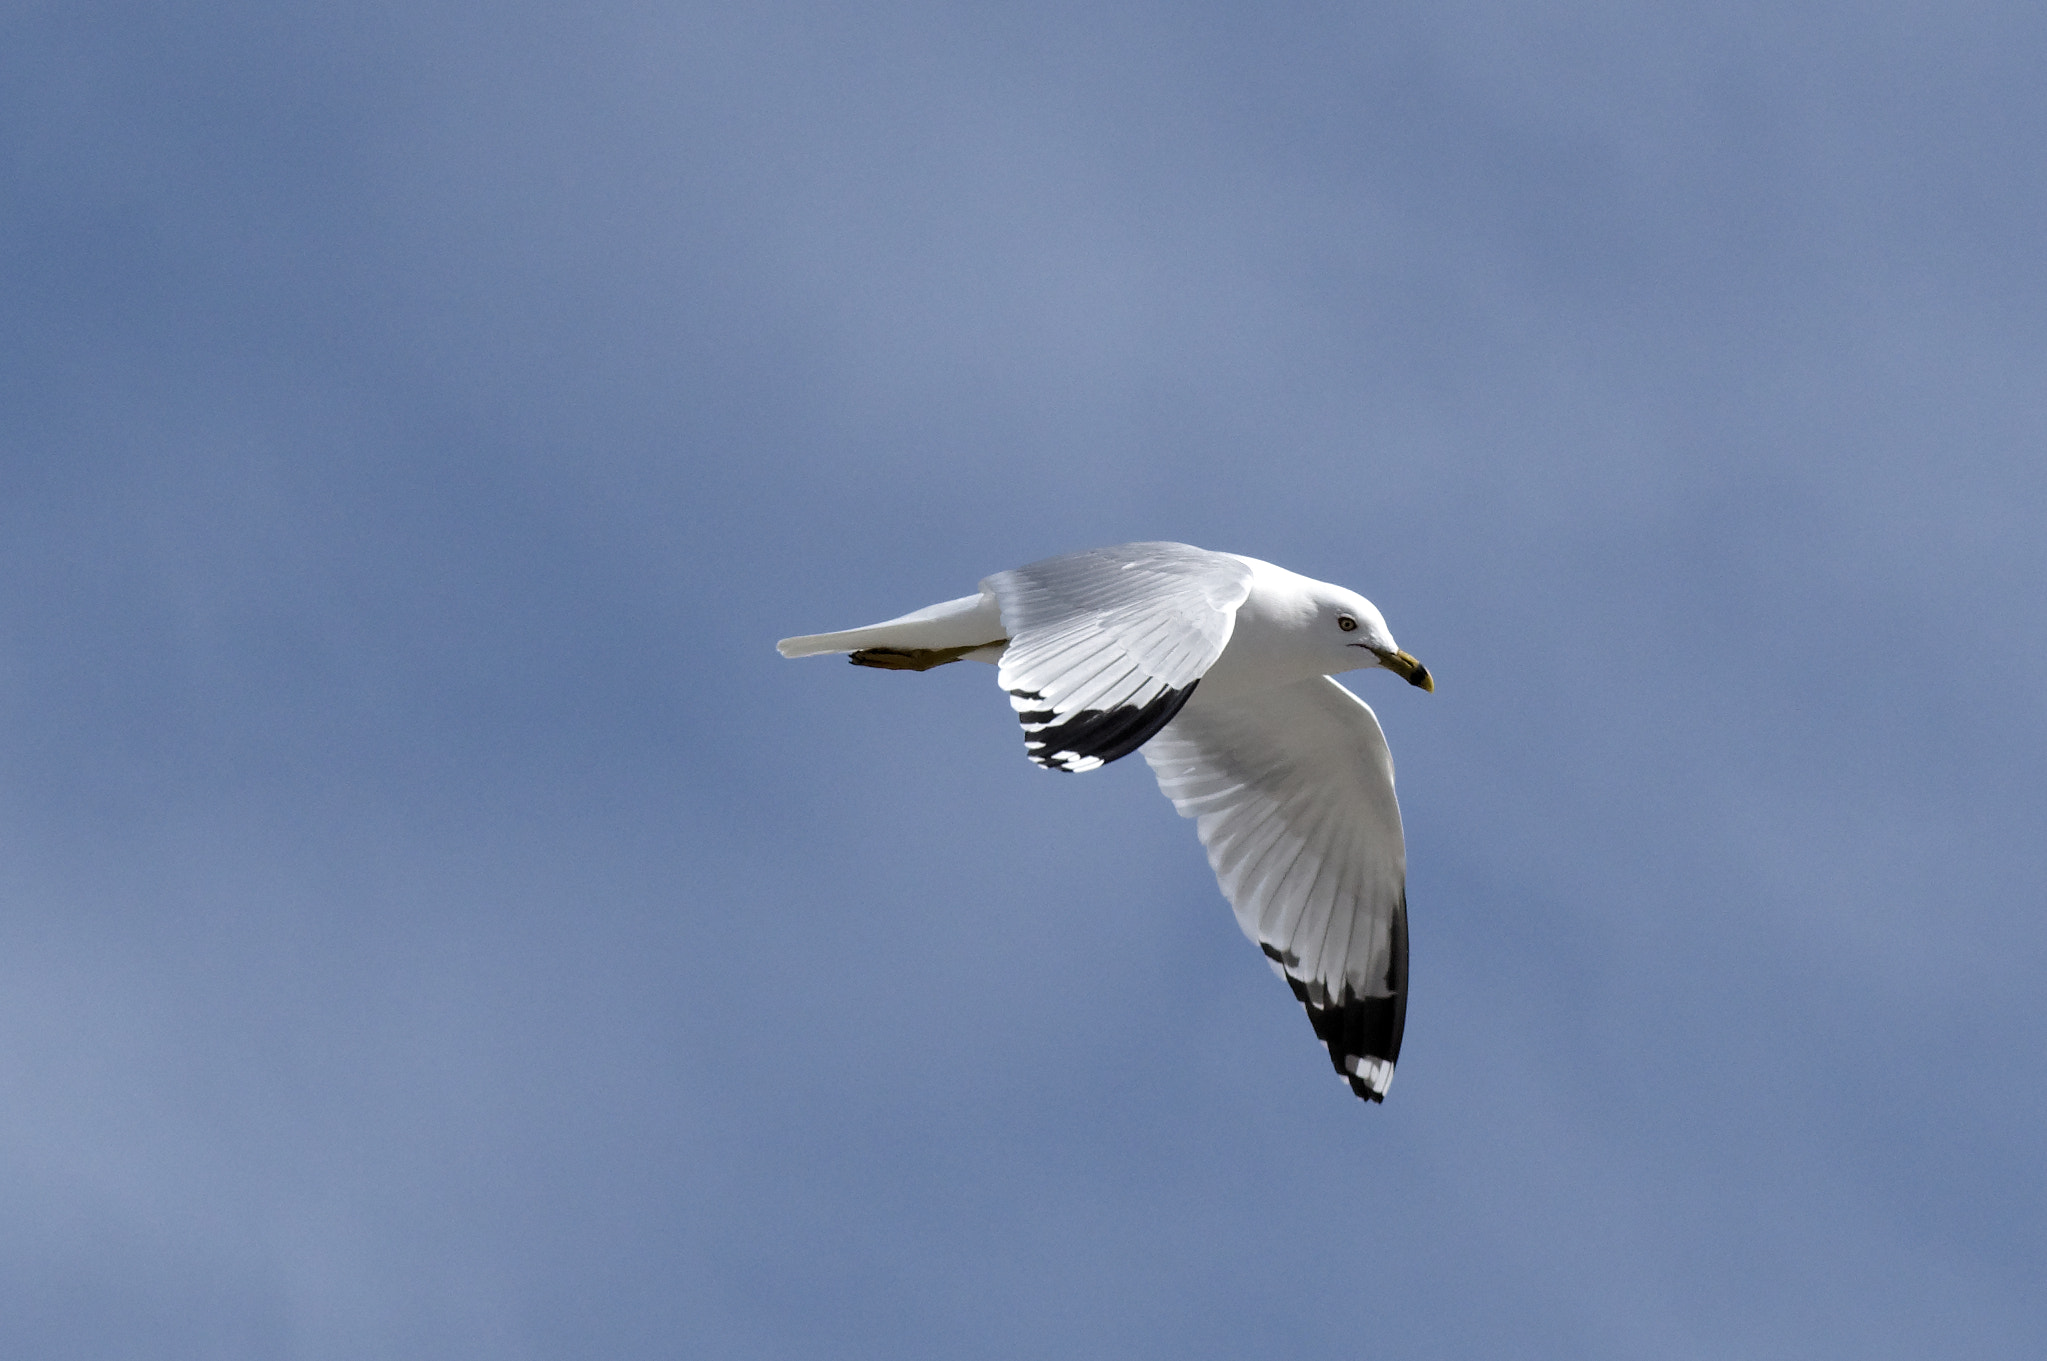 Pentax smc FA 77mm 1.8 Limited sample photo. Spring gull in flight 3 photography